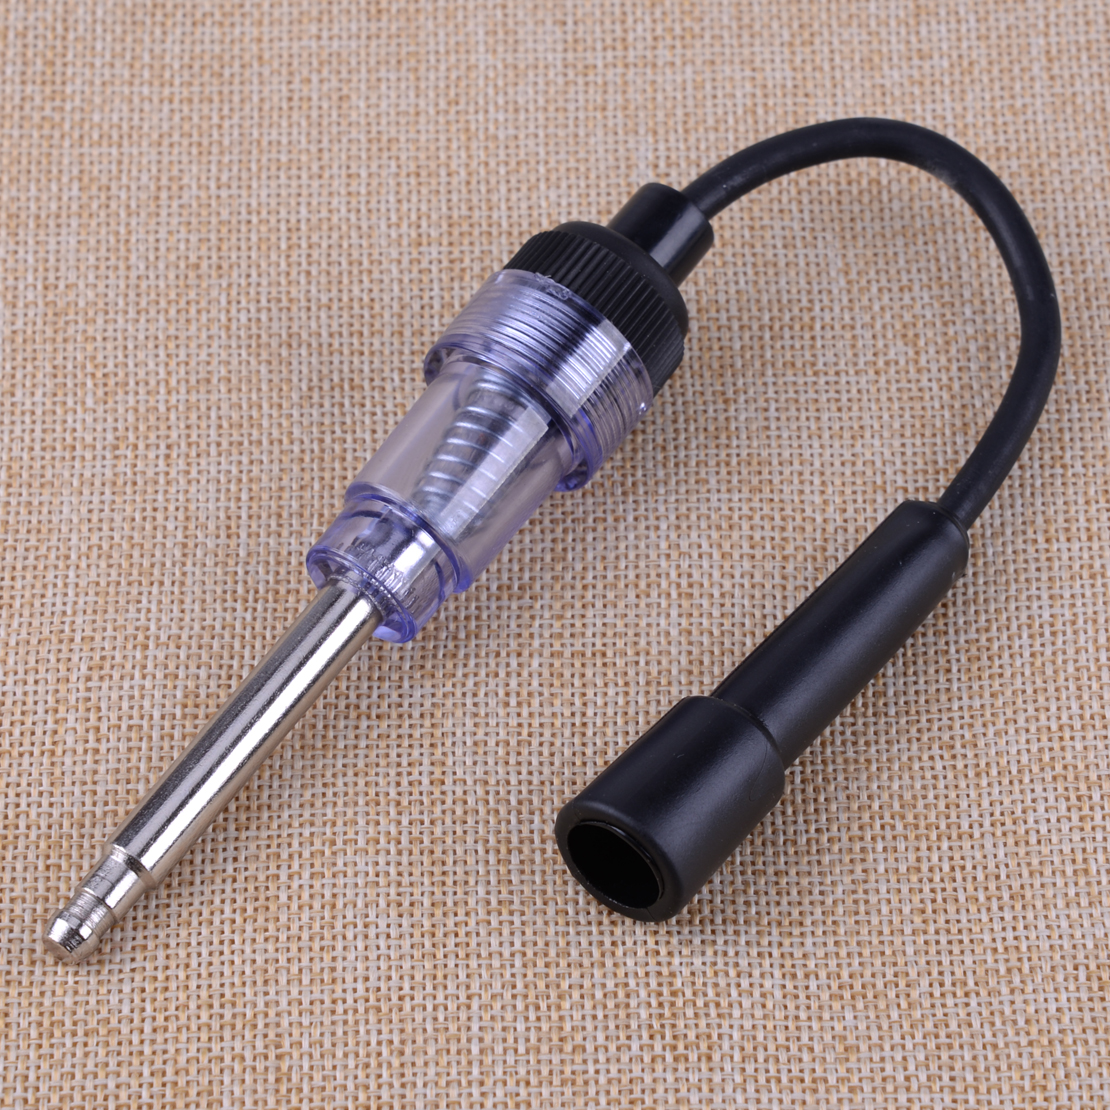 Auto Spark Plug Tester Engines Ignition System Coil Diagnostic Tools Detector